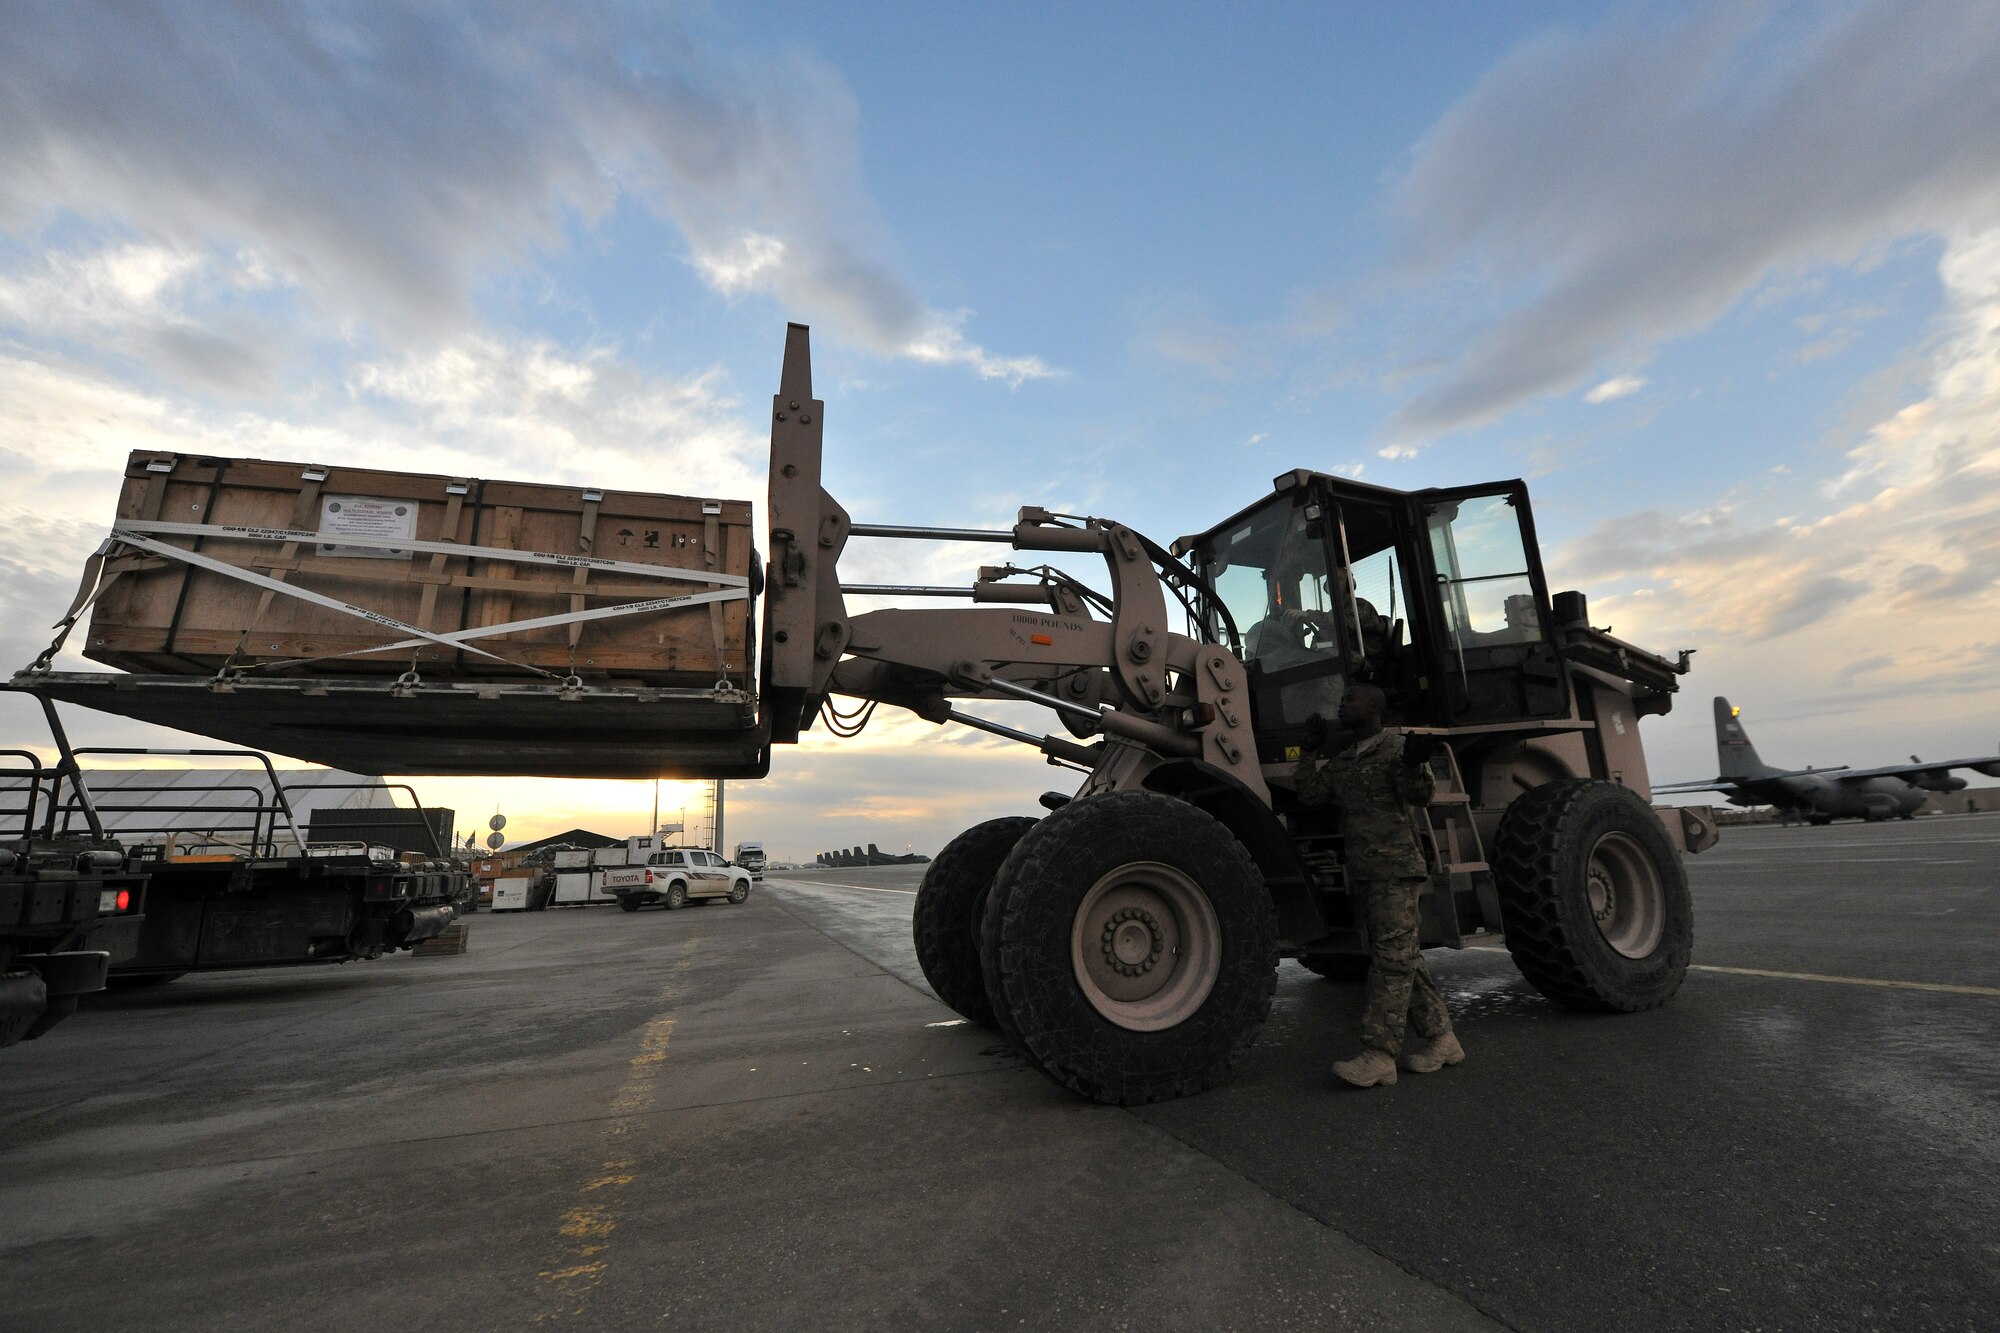 Staff Sgt. Gary Williams, 455th Expeditionary Aerial Port Squadron, Detachment 3 Aerial Port specialist, guides a forklift across the contingency cargo staging yard at Camp Marmal, Afghanistan, Jan 30, 2013. Williams is deployed from the 60th Aerial Port Squadron, Travis Air Force Base, Calif., supporting the International Security Assistance Force Regional Command-North transportation mission. (U.S. Air Force photo/Senior Airman Chris Willis)